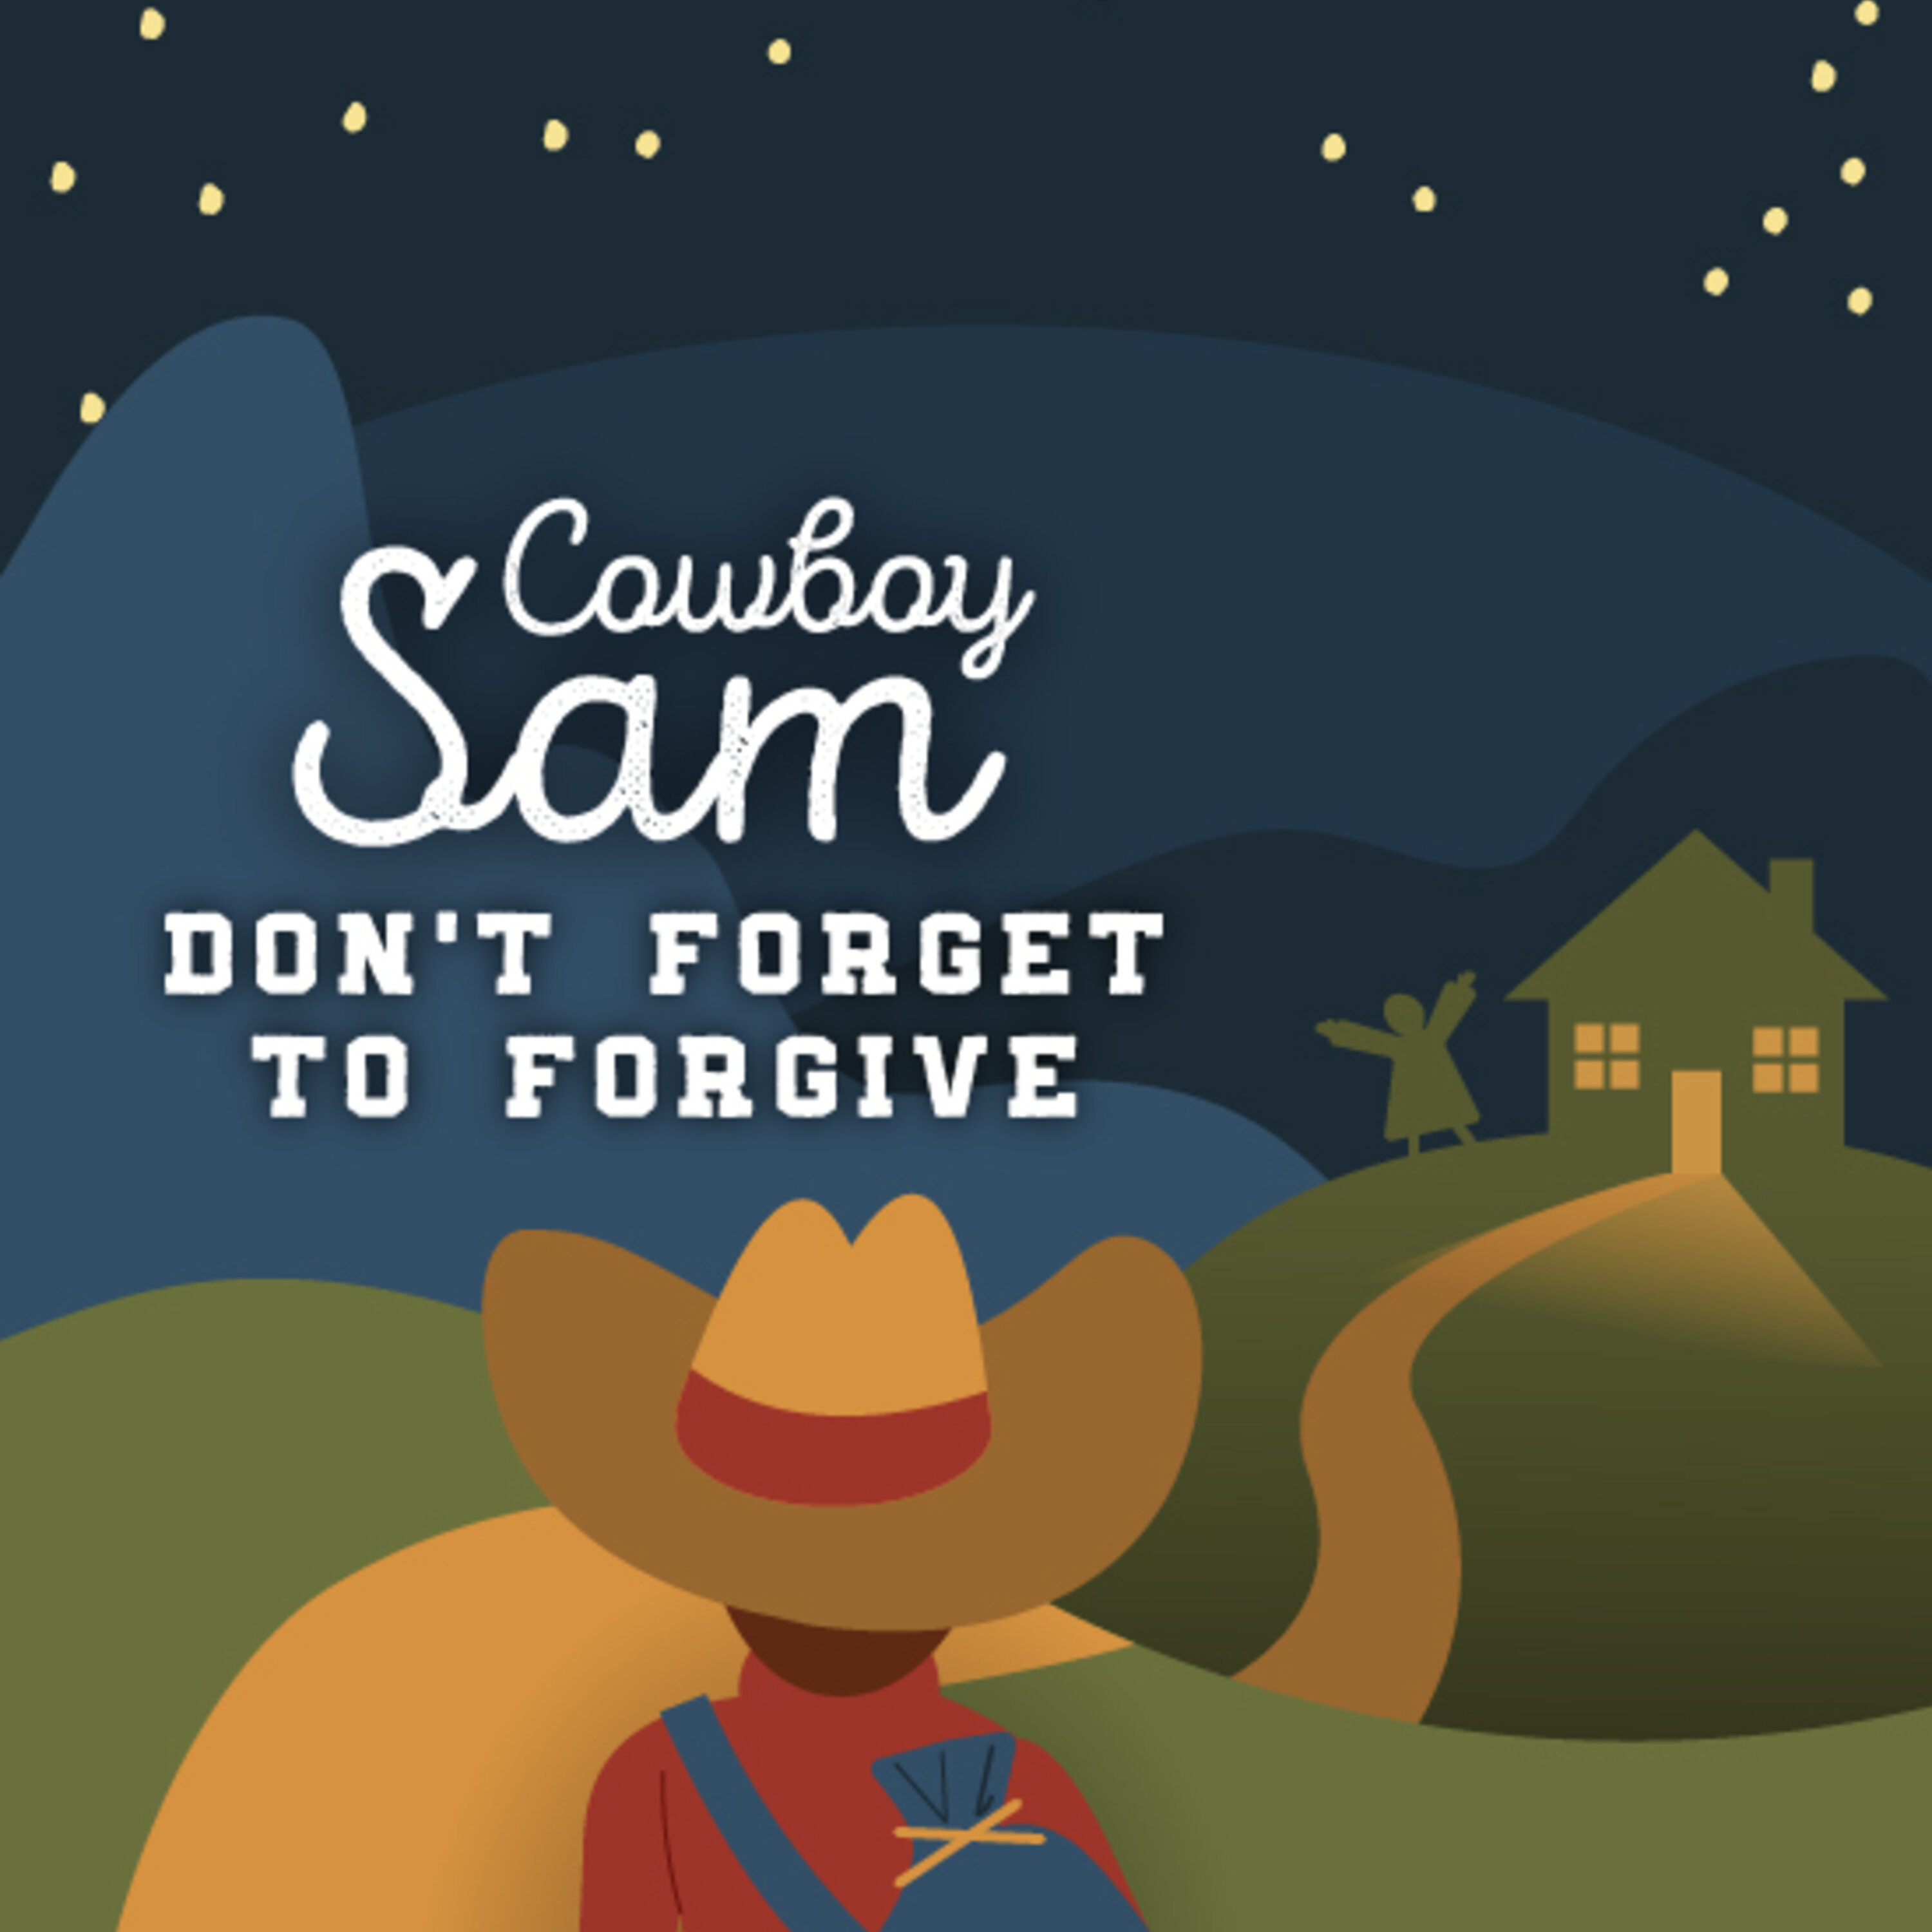 Cowboy Sam: Don’t Forget to Forgive